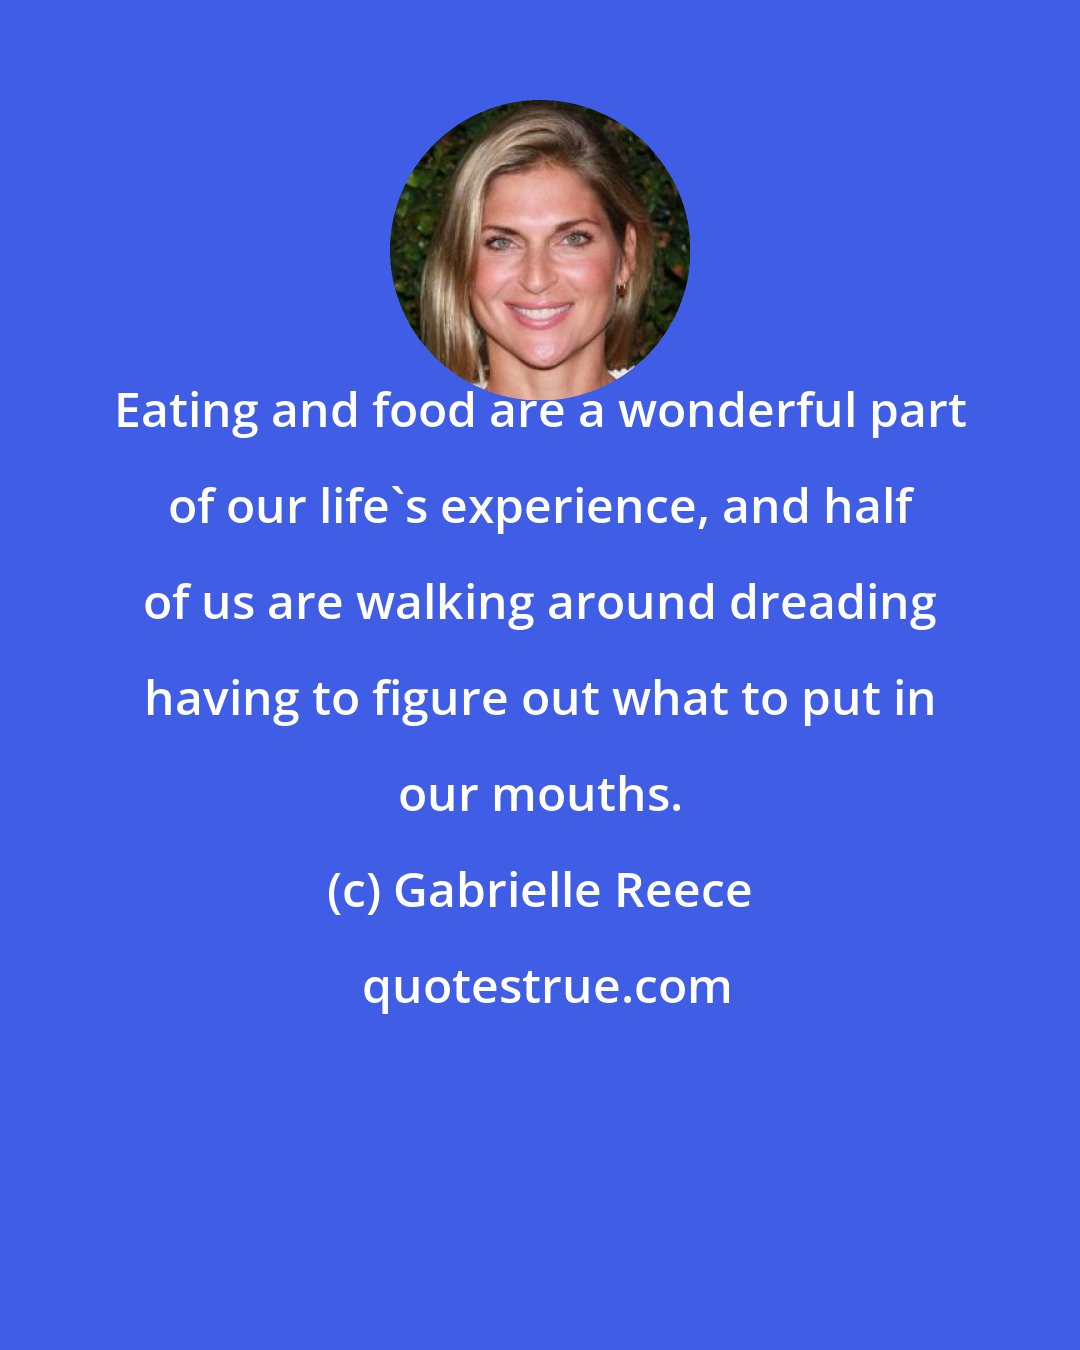 Gabrielle Reece: Eating and food are a wonderful part of our life's experience, and half of us are walking around dreading having to figure out what to put in our mouths.